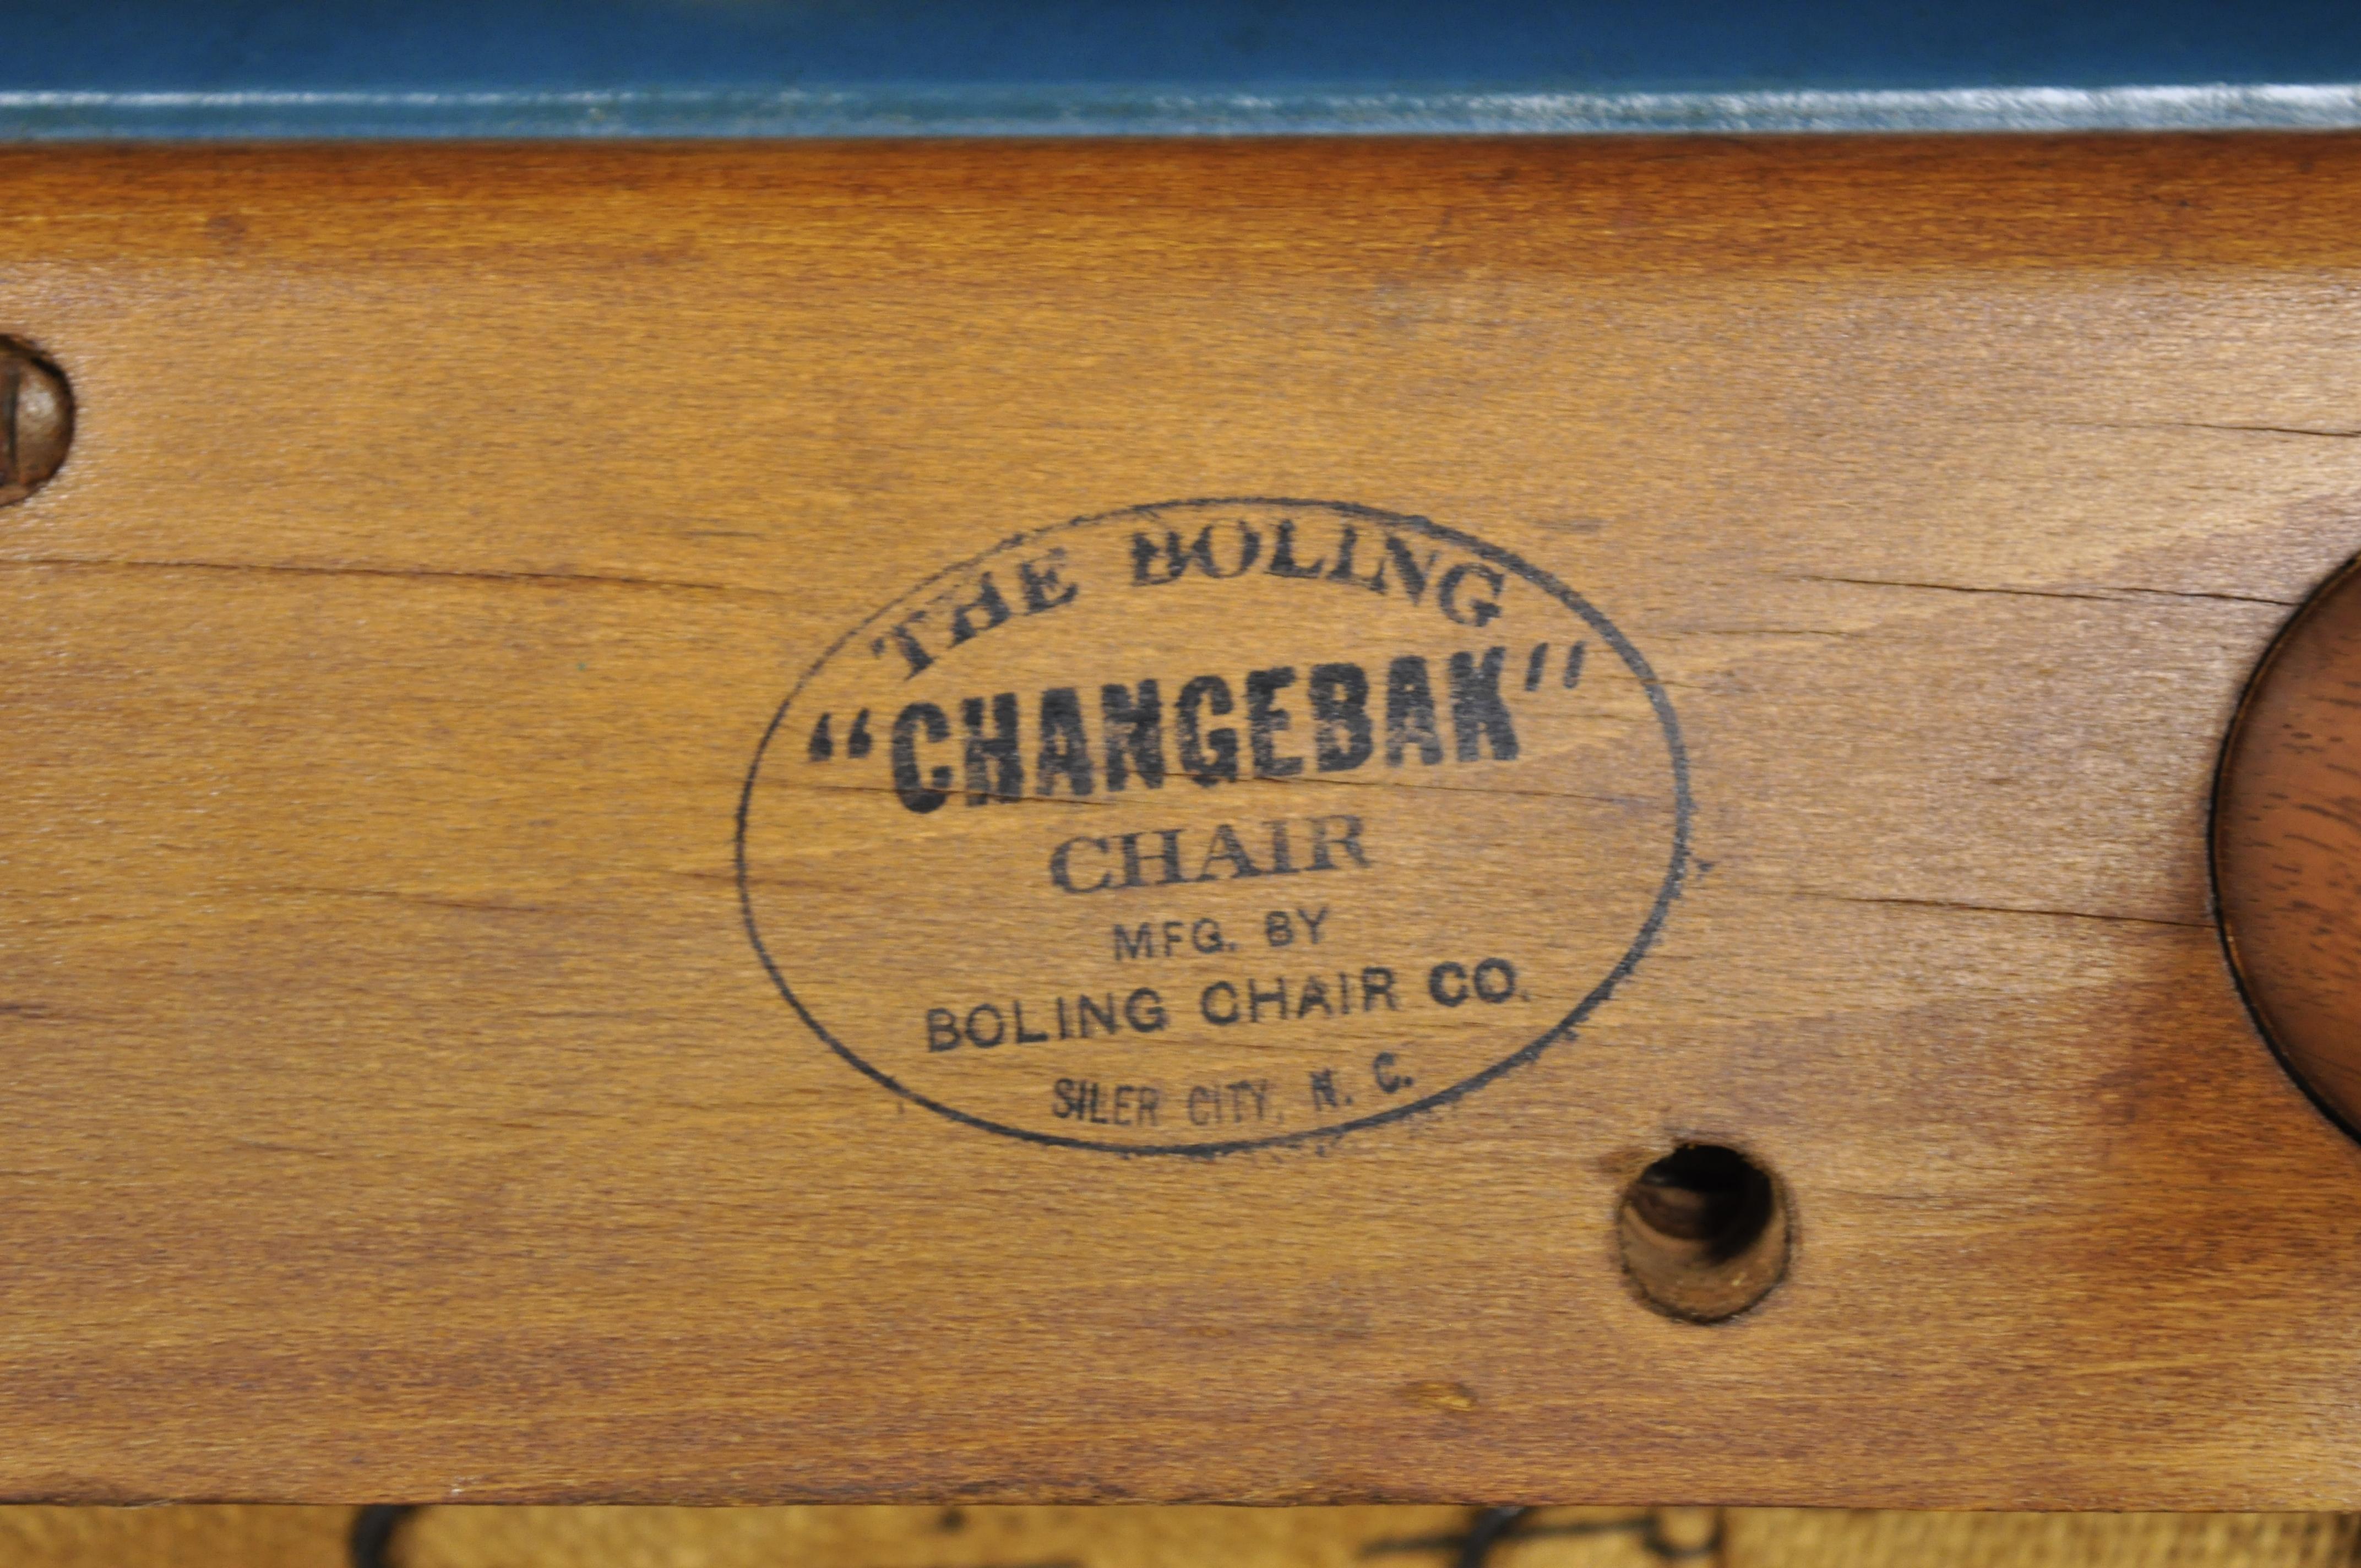 The Boling Changebak Chair Walnut Cane Back Mid Century by Boling Chair Co. 'A' 1